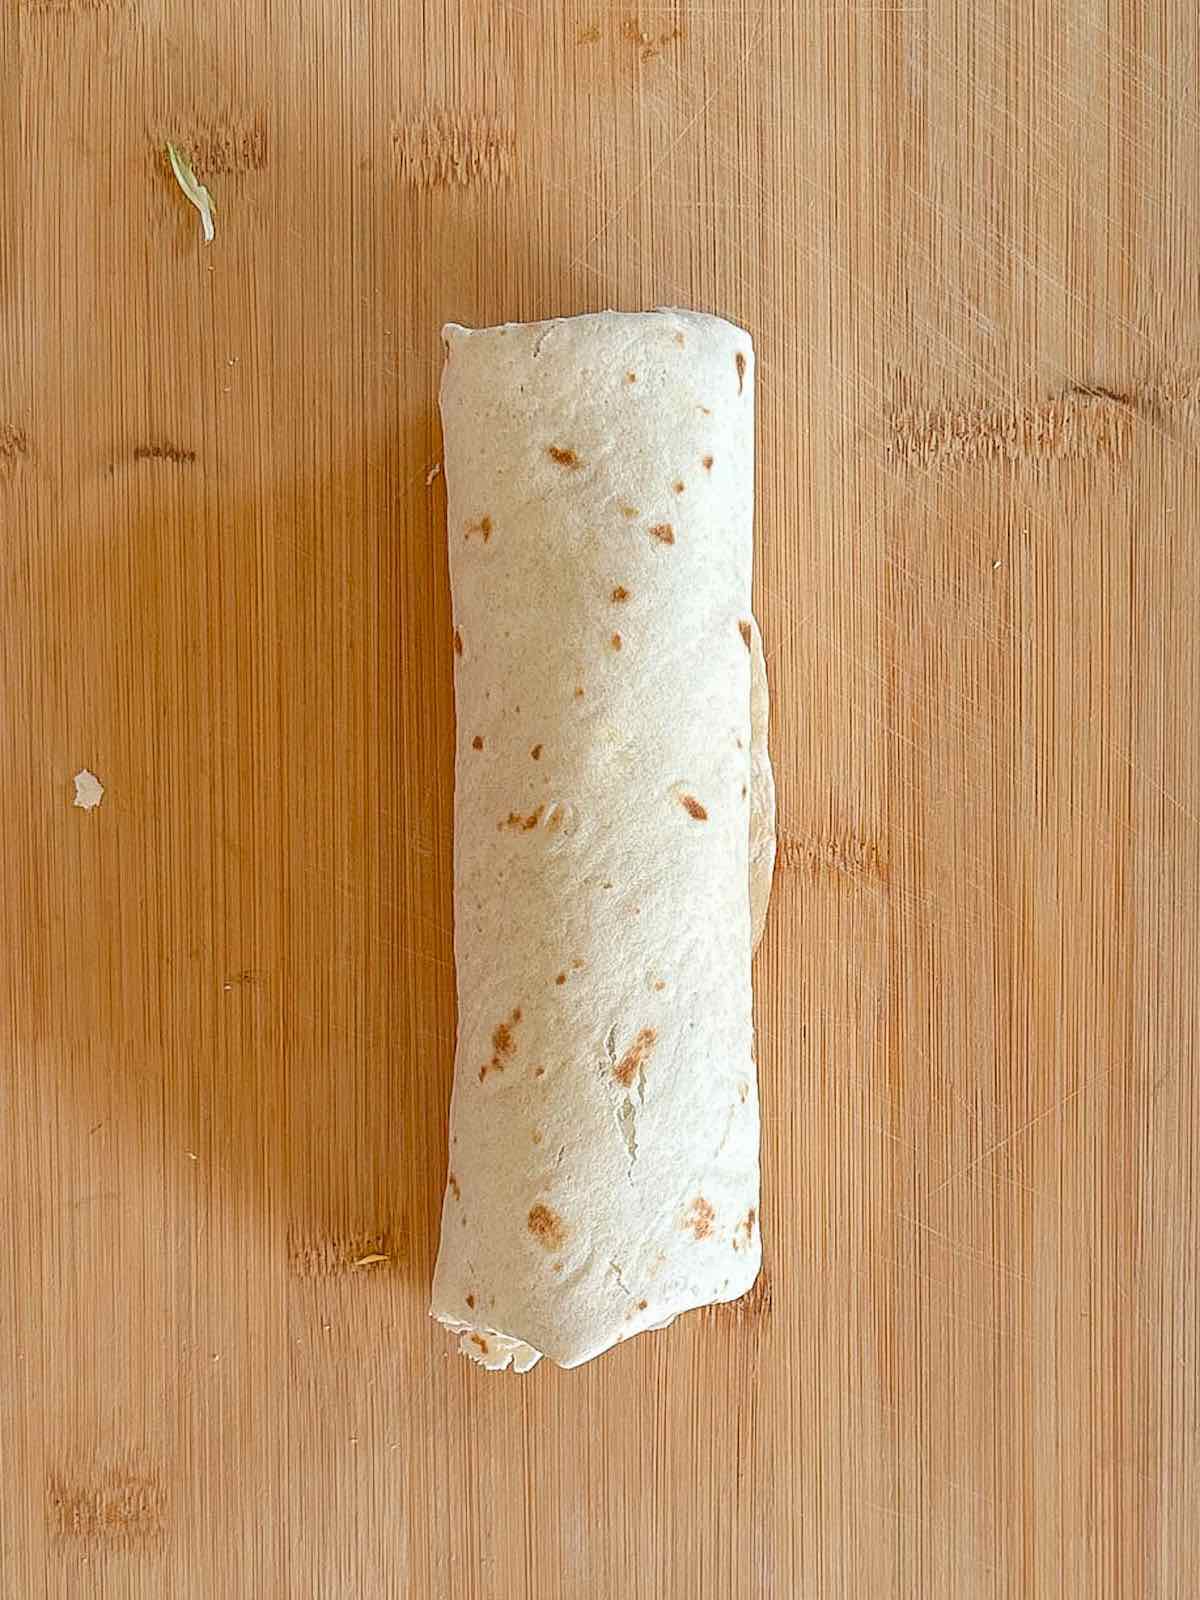 Roast beef wrapped in a flour tortilla.